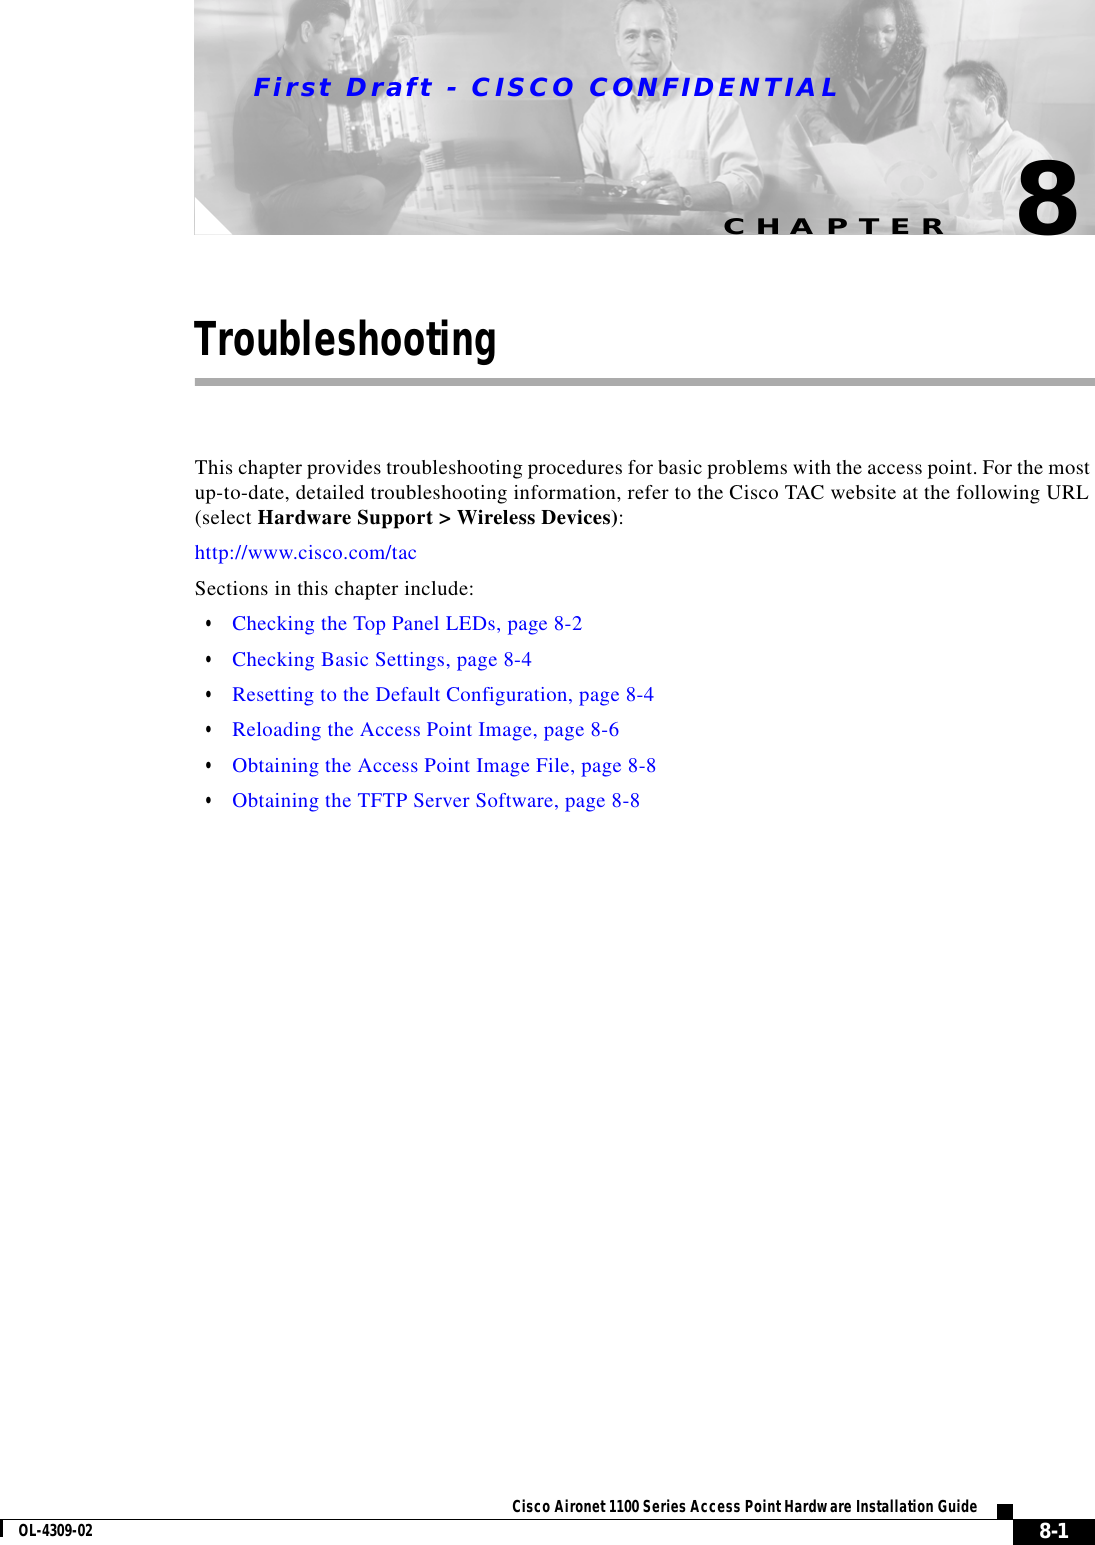 CHAPTERFirst Draft - CISCO CONFIDENTIAL8-1Cisco Aironet 1100 Series Access Point Hardware Installation GuideOL-4309-028TroubleshootingThis chapter provides troubleshooting procedures for basic problems with the access point. For the most up-to-date, detailed troubleshooting information, refer to the Cisco TAC website at the following URL (select Hardware Support &gt; Wireless Devices):http://www.cisco.com/tac Sections in this chapter include:•Checking the Top Panel LEDs, page 8-2•Checking Basic Settings, page 8-4•Resetting to the Default Configuration, page 8-4•Reloading the Access Point Image, page 8-6•Obtaining the Access Point Image File, page 8-8•Obtaining the TFTP Server Software, page 8-8